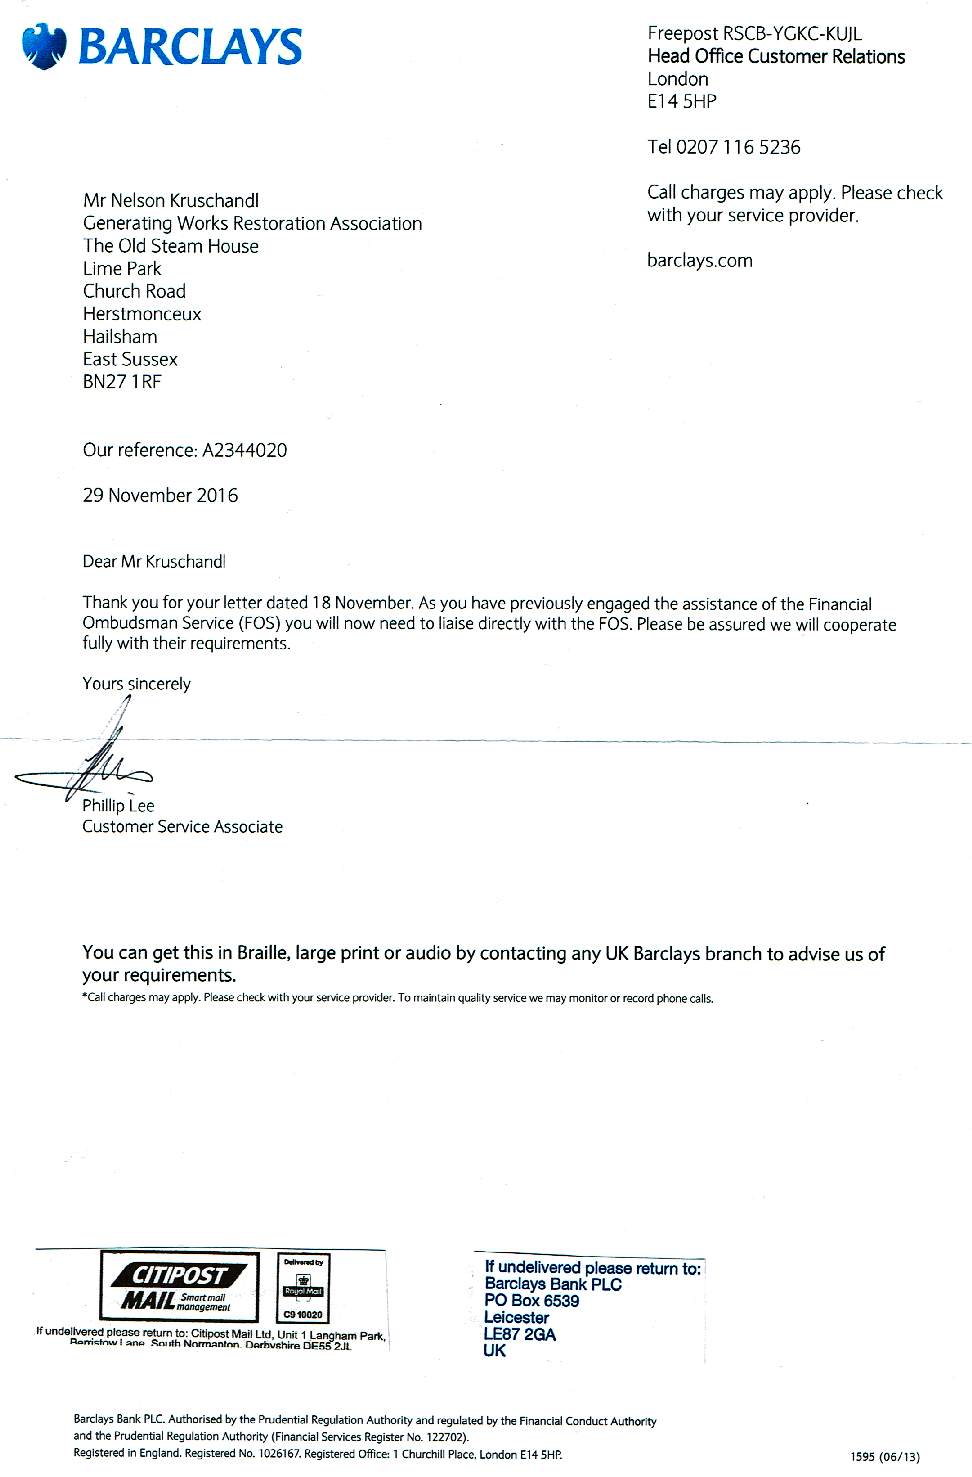 Letter from Barclays bank, head office, London, E14 5HP